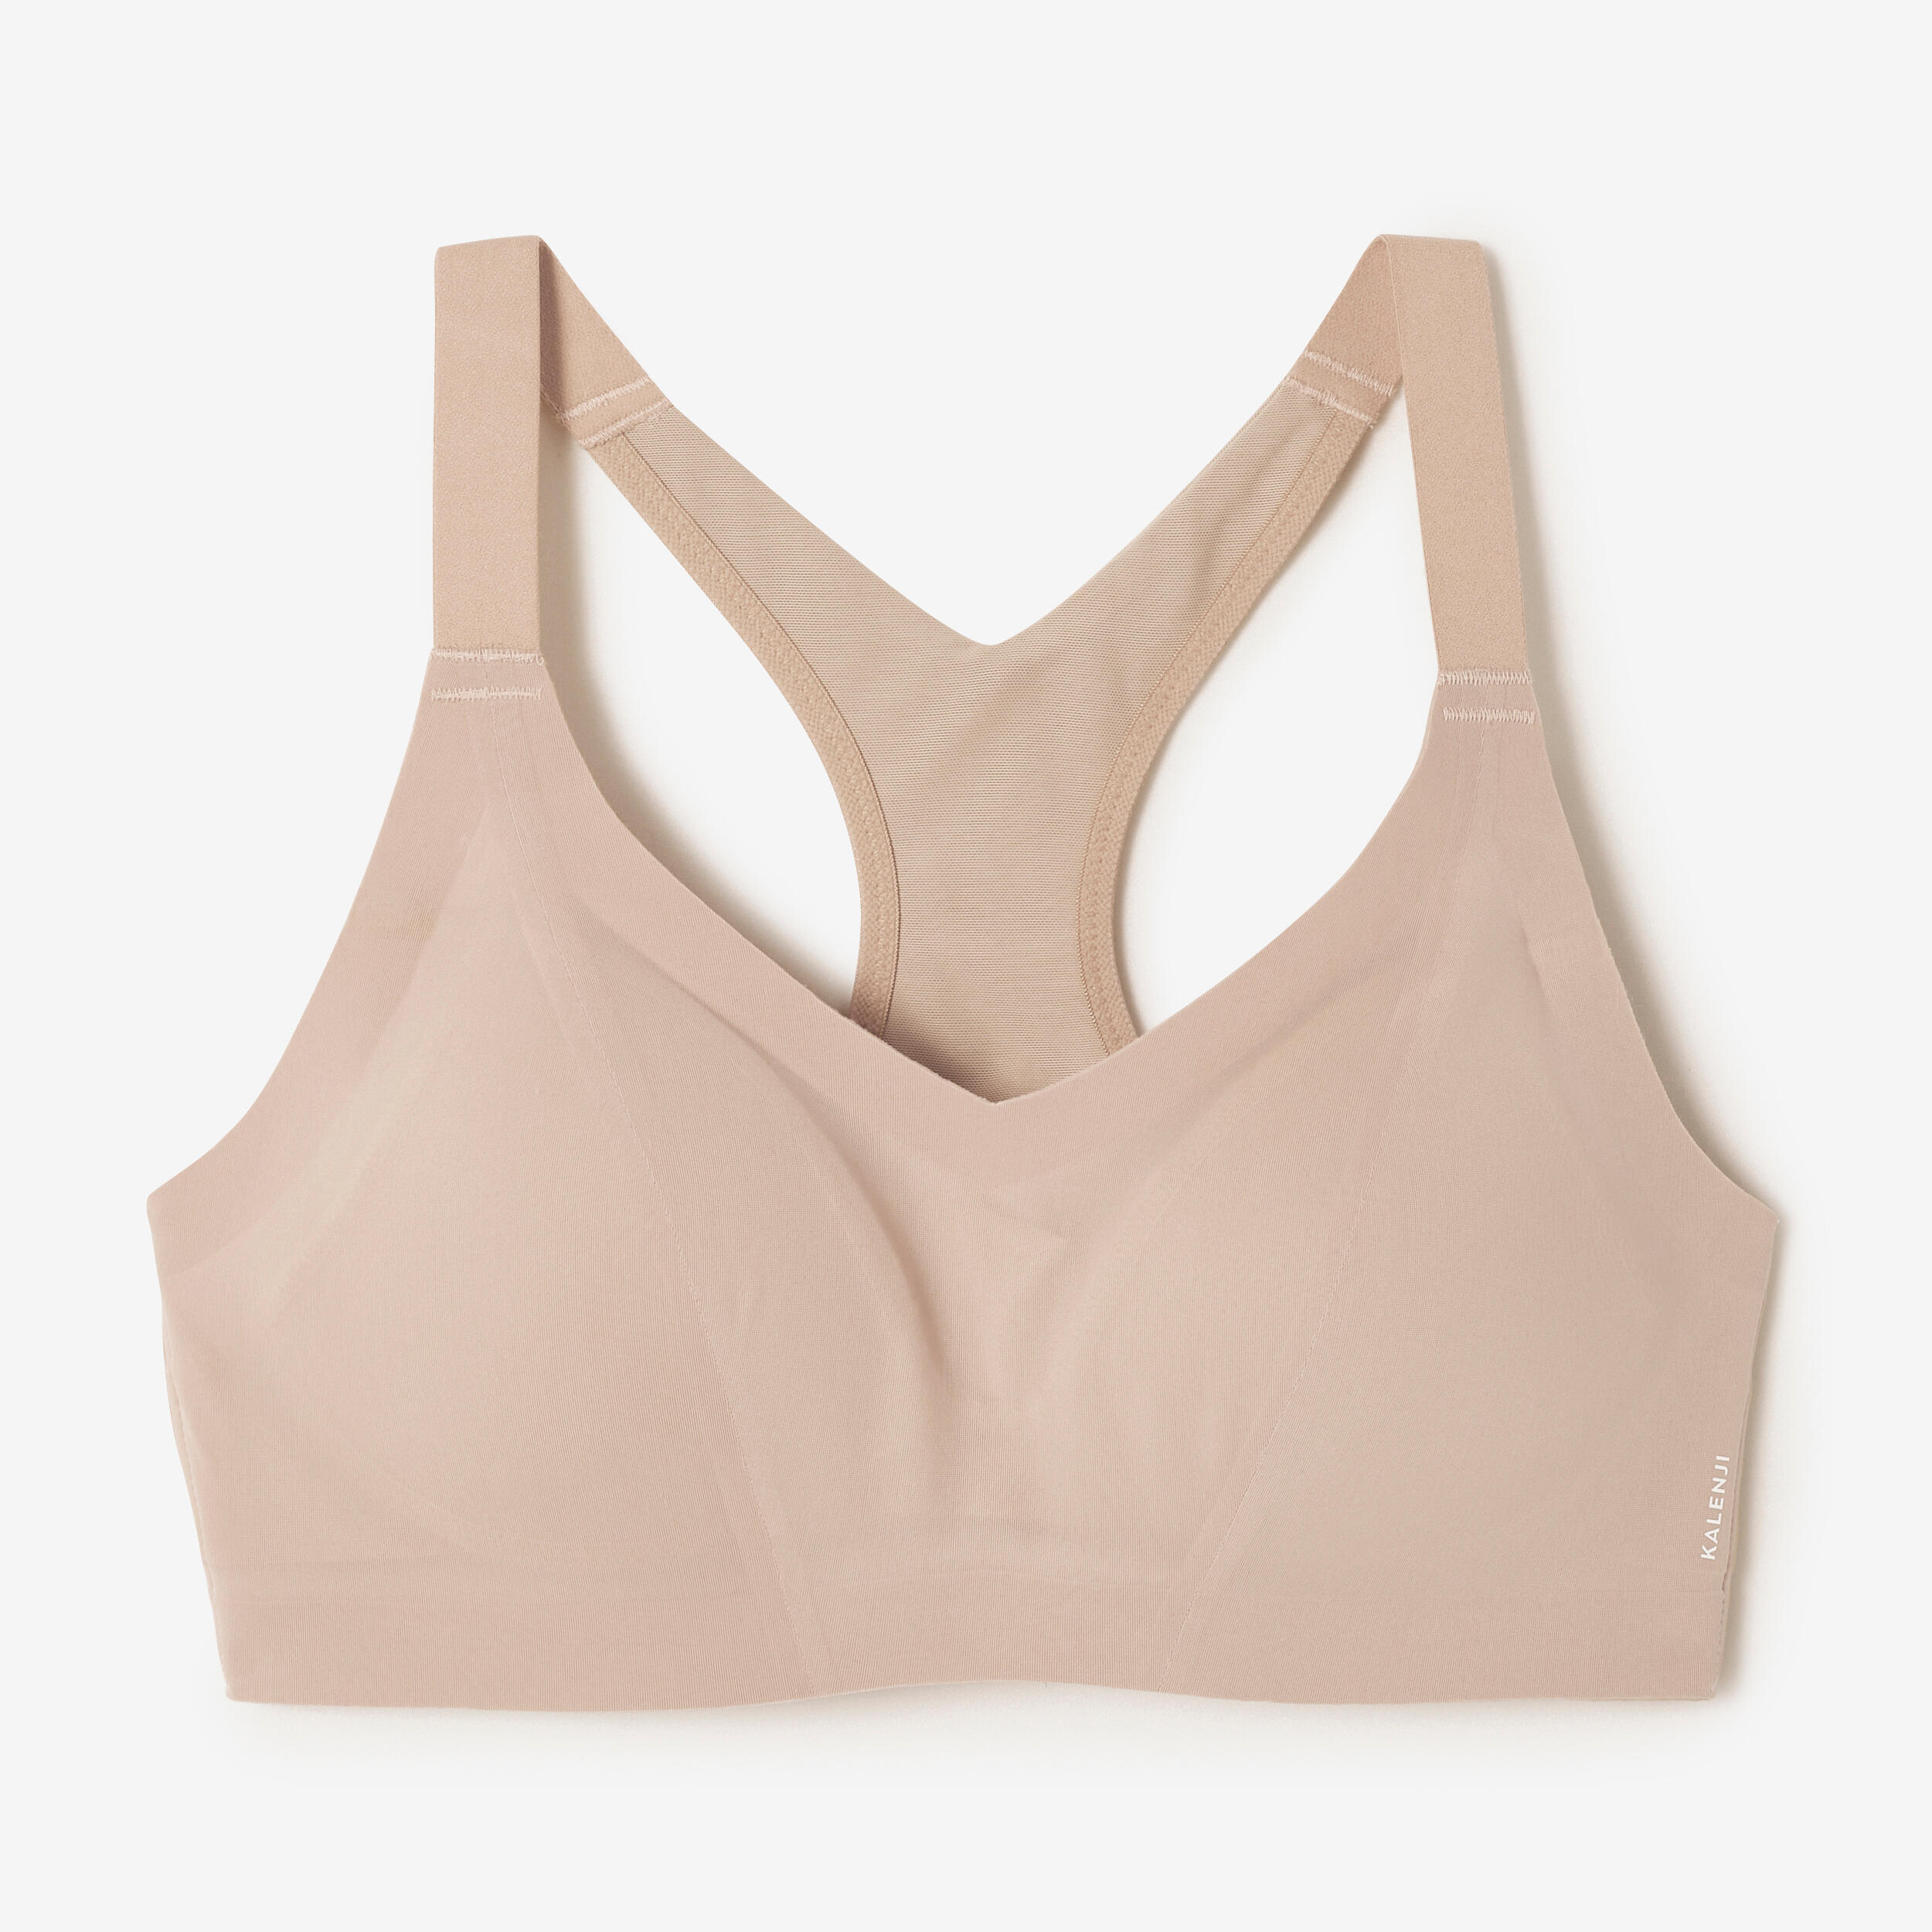 Women's invisible sports bra with high-support cups - Beige 9/11